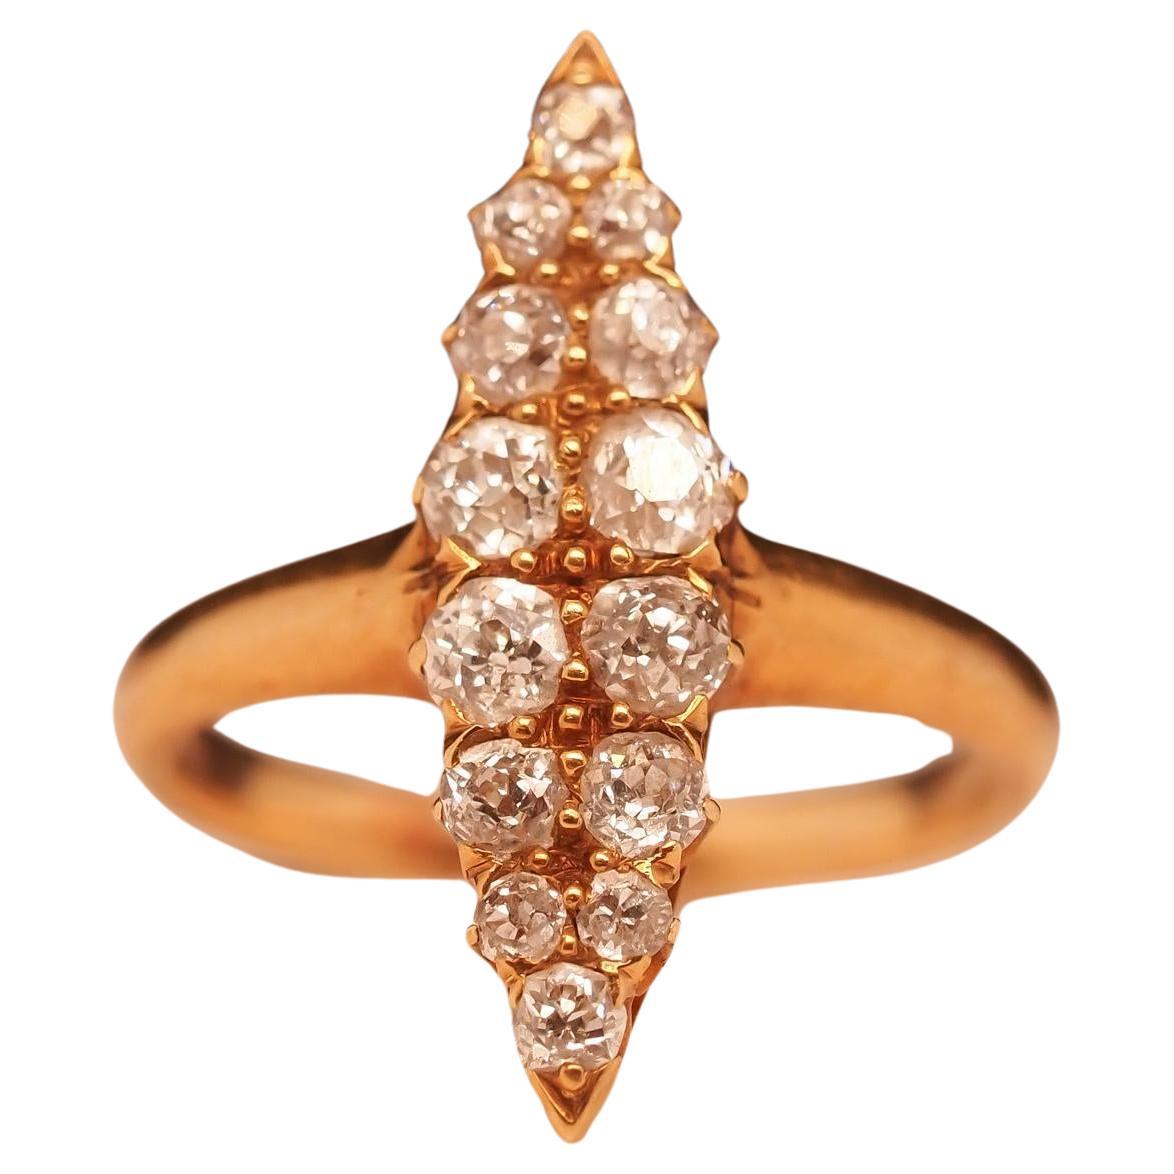 Circa 1900s Edwardian 18K Yellow Gold Navette Ring with Old Mine Diamonds For Sale